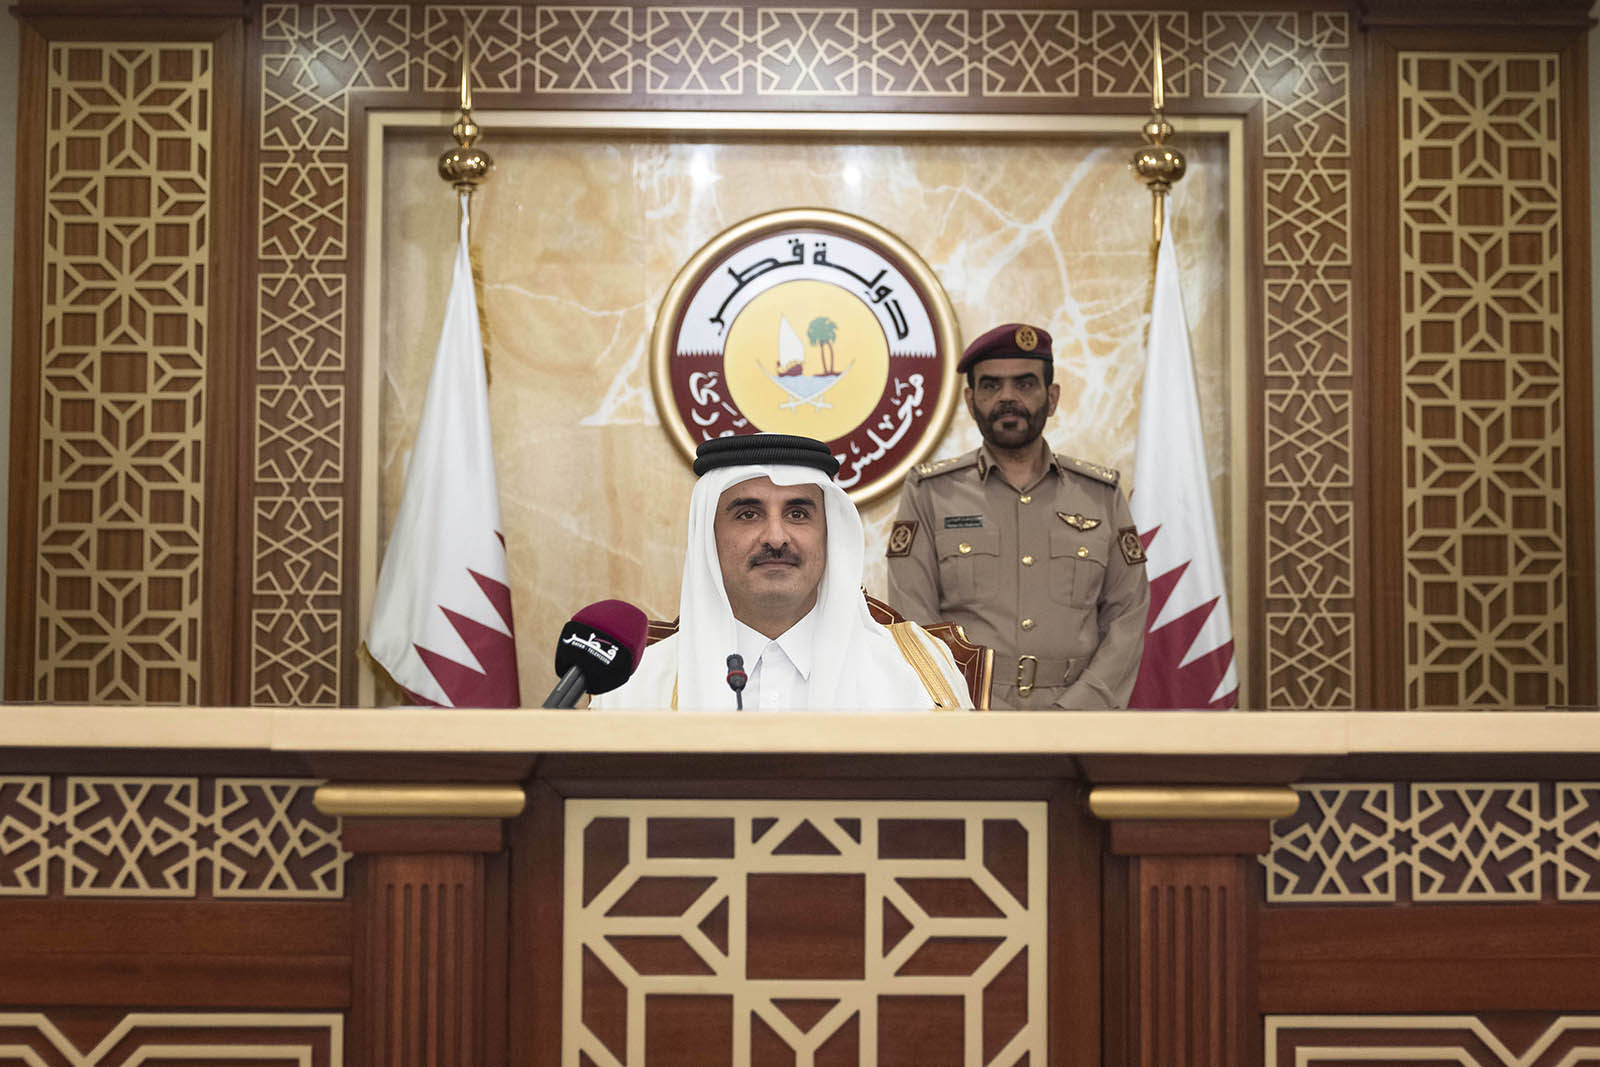 HH The Amir Inaugurates the 48th Ordinary Session of Shura Council